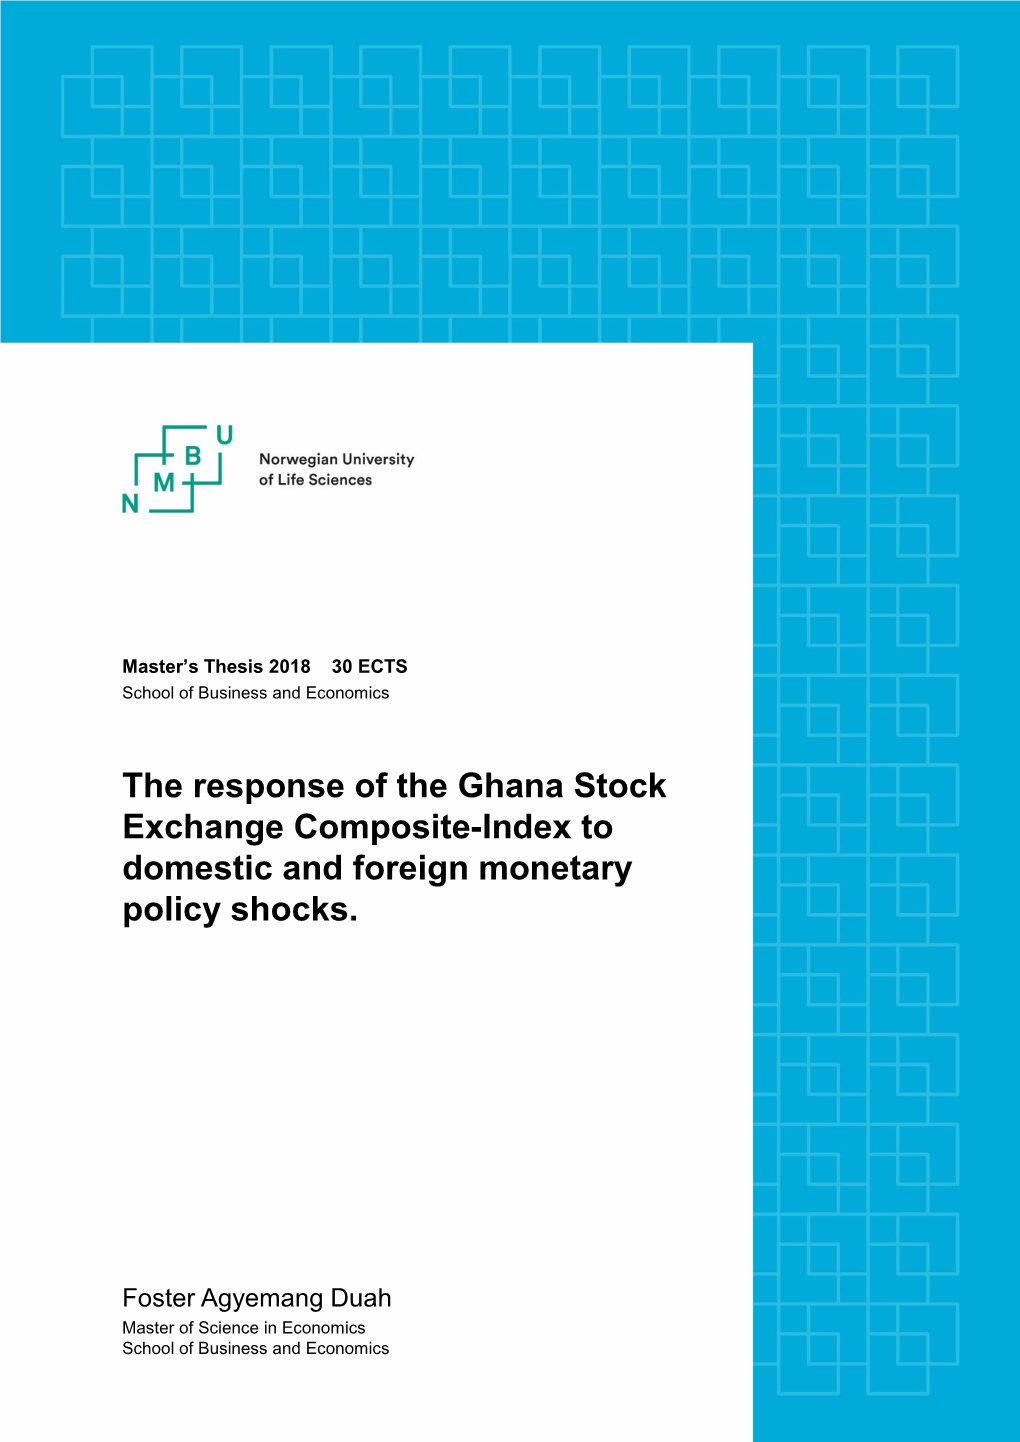 The Response of the Ghana Stock Exchange Composite-Index to Domestic and Foreign Monetary Policy Shocks